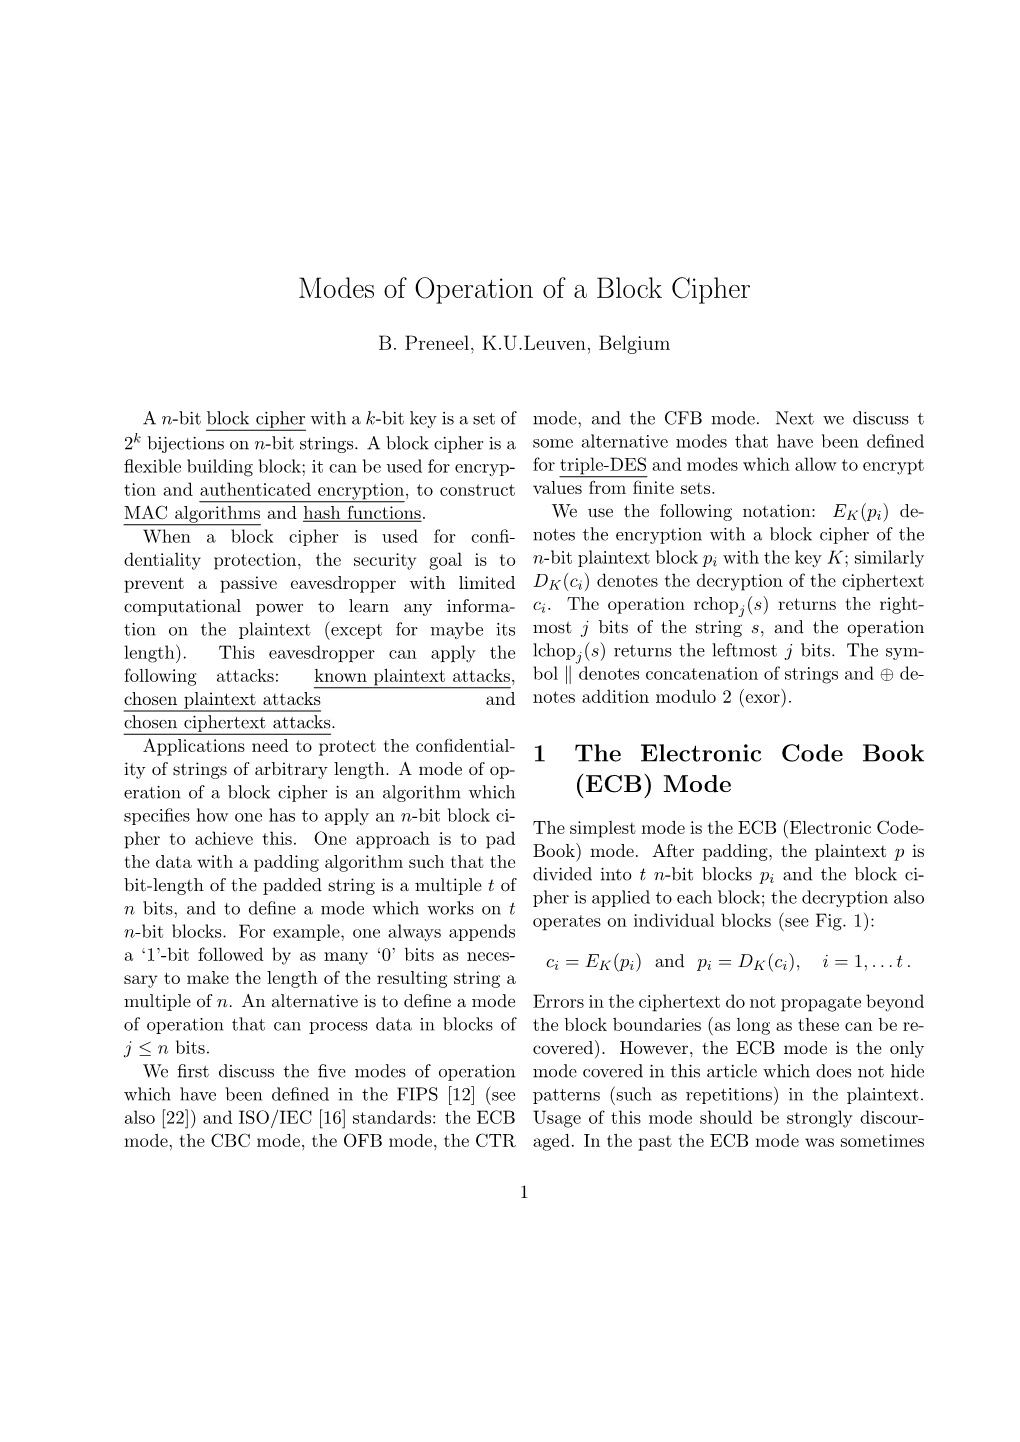 Modes of Operation of a Block Cipher